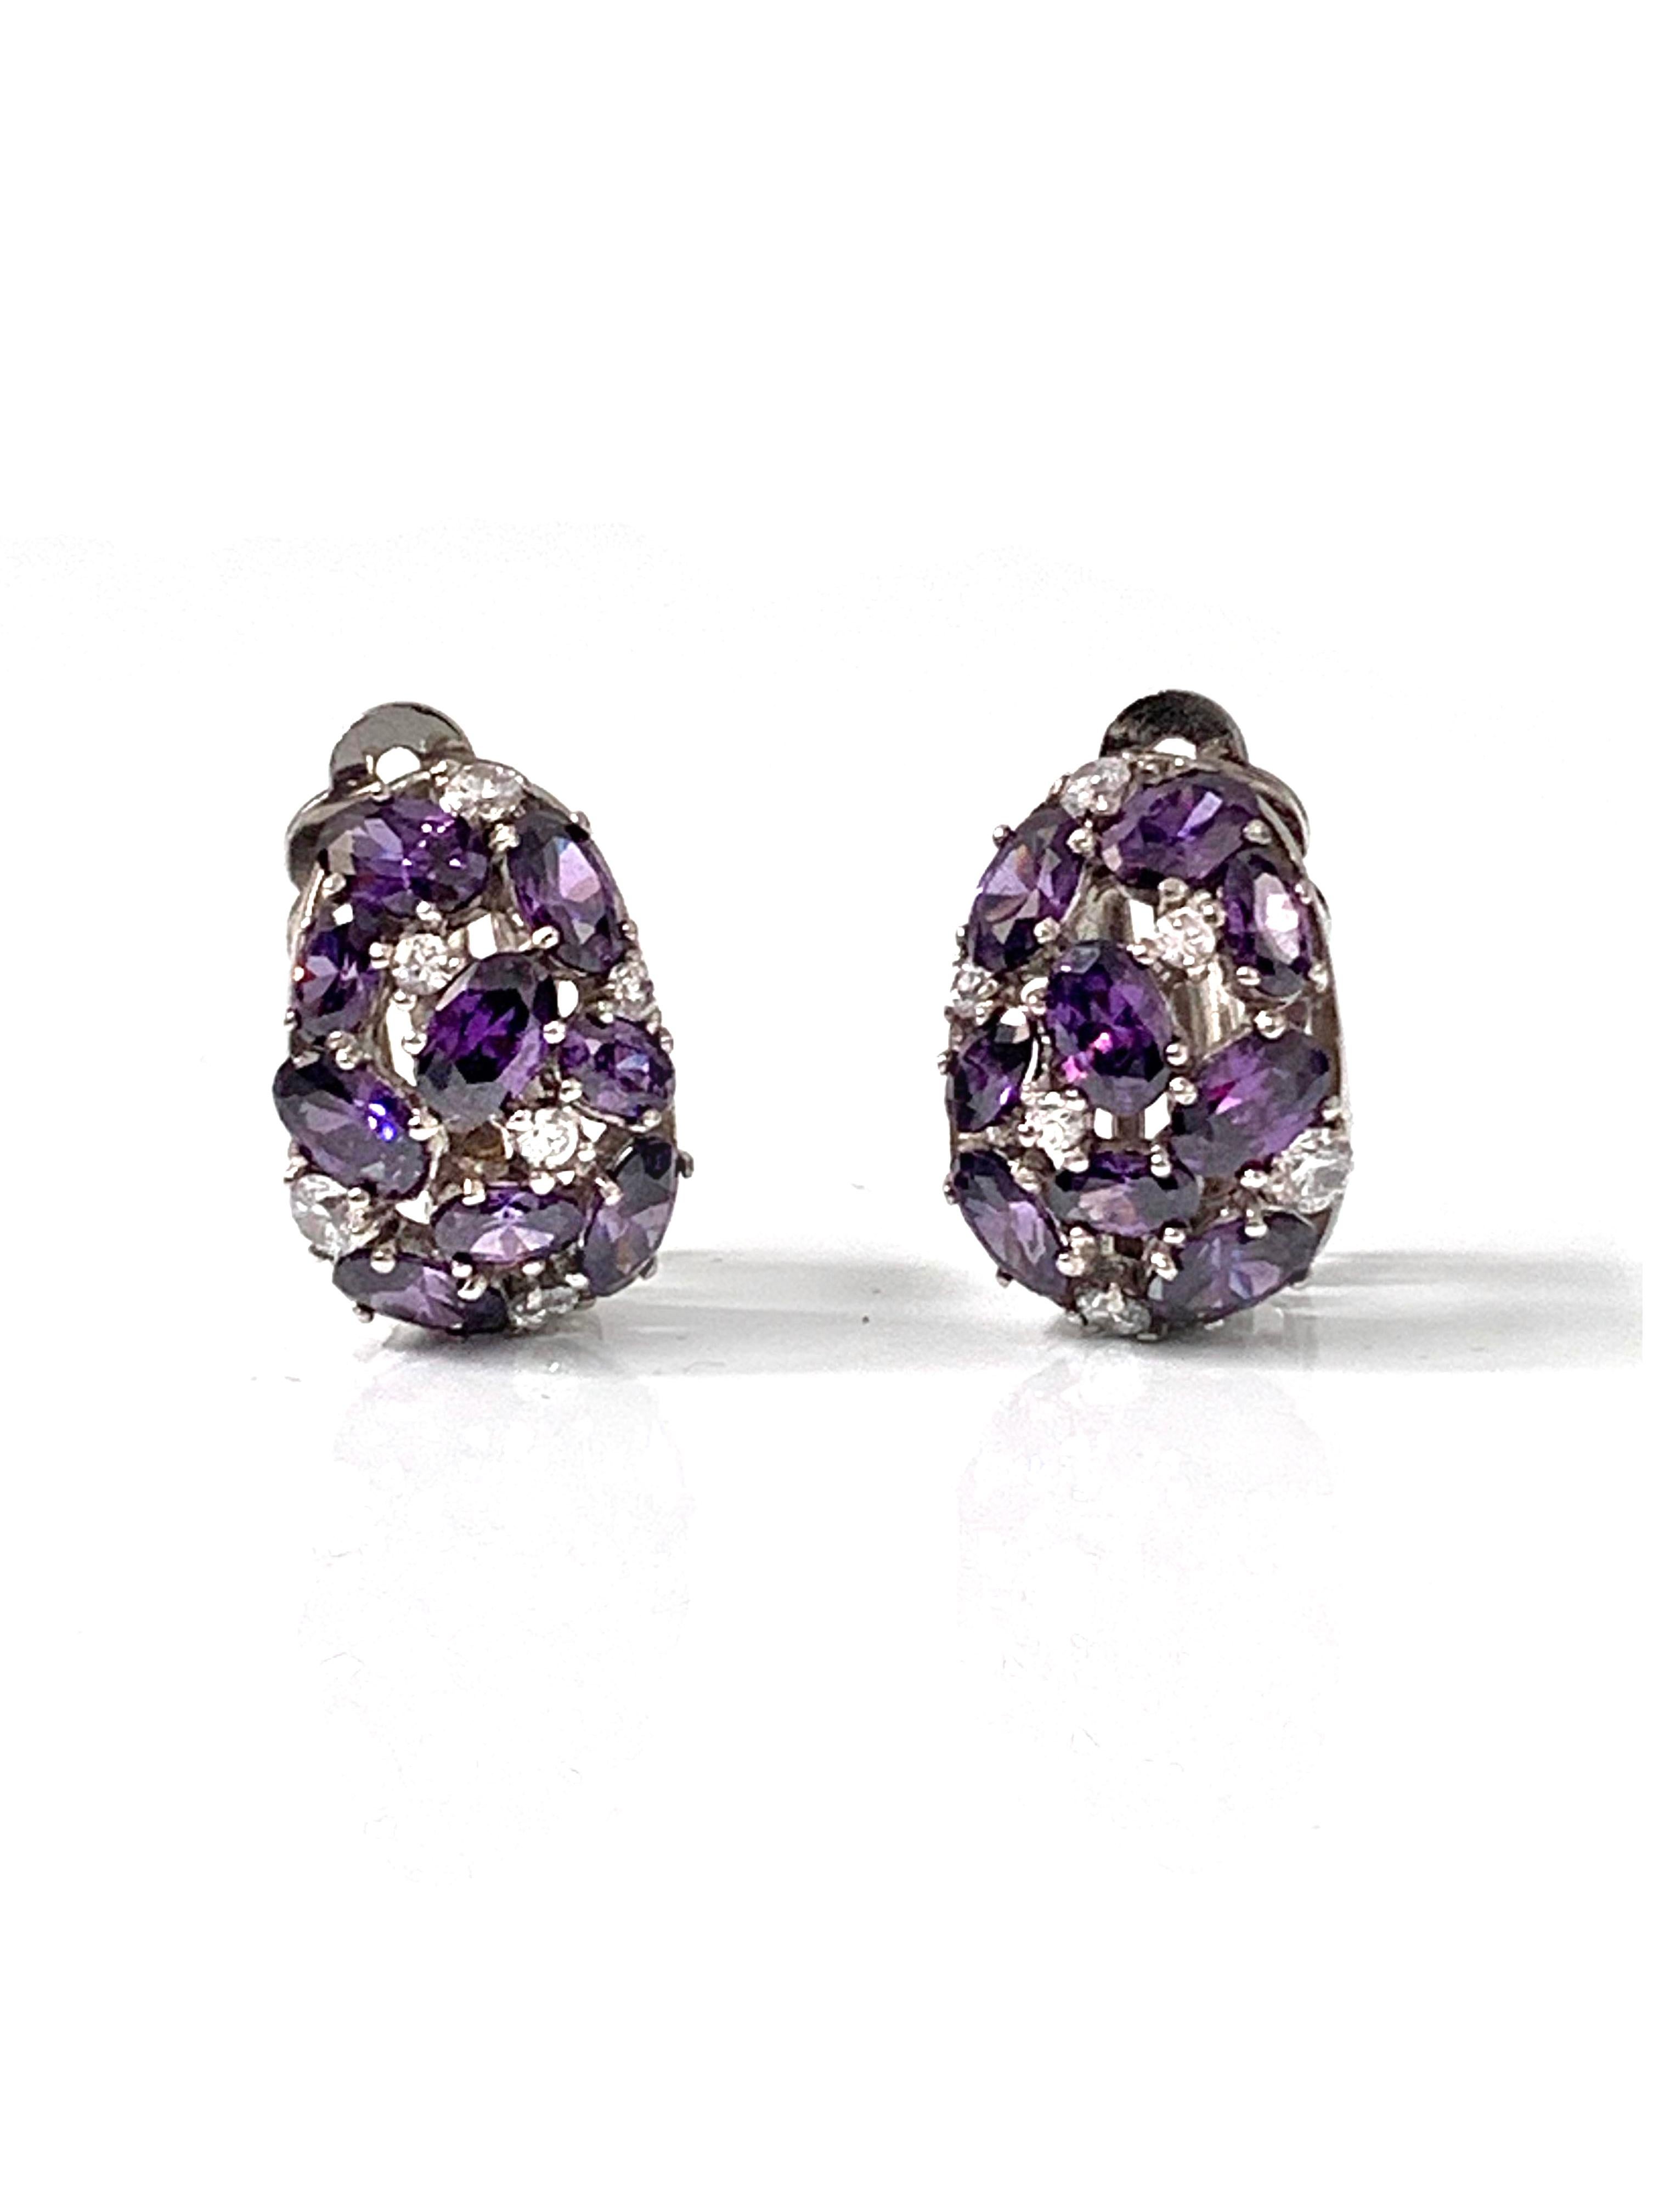 Contemporary Encrusted Amethyst CZ and Simulated Diamond Clip-on Earrings